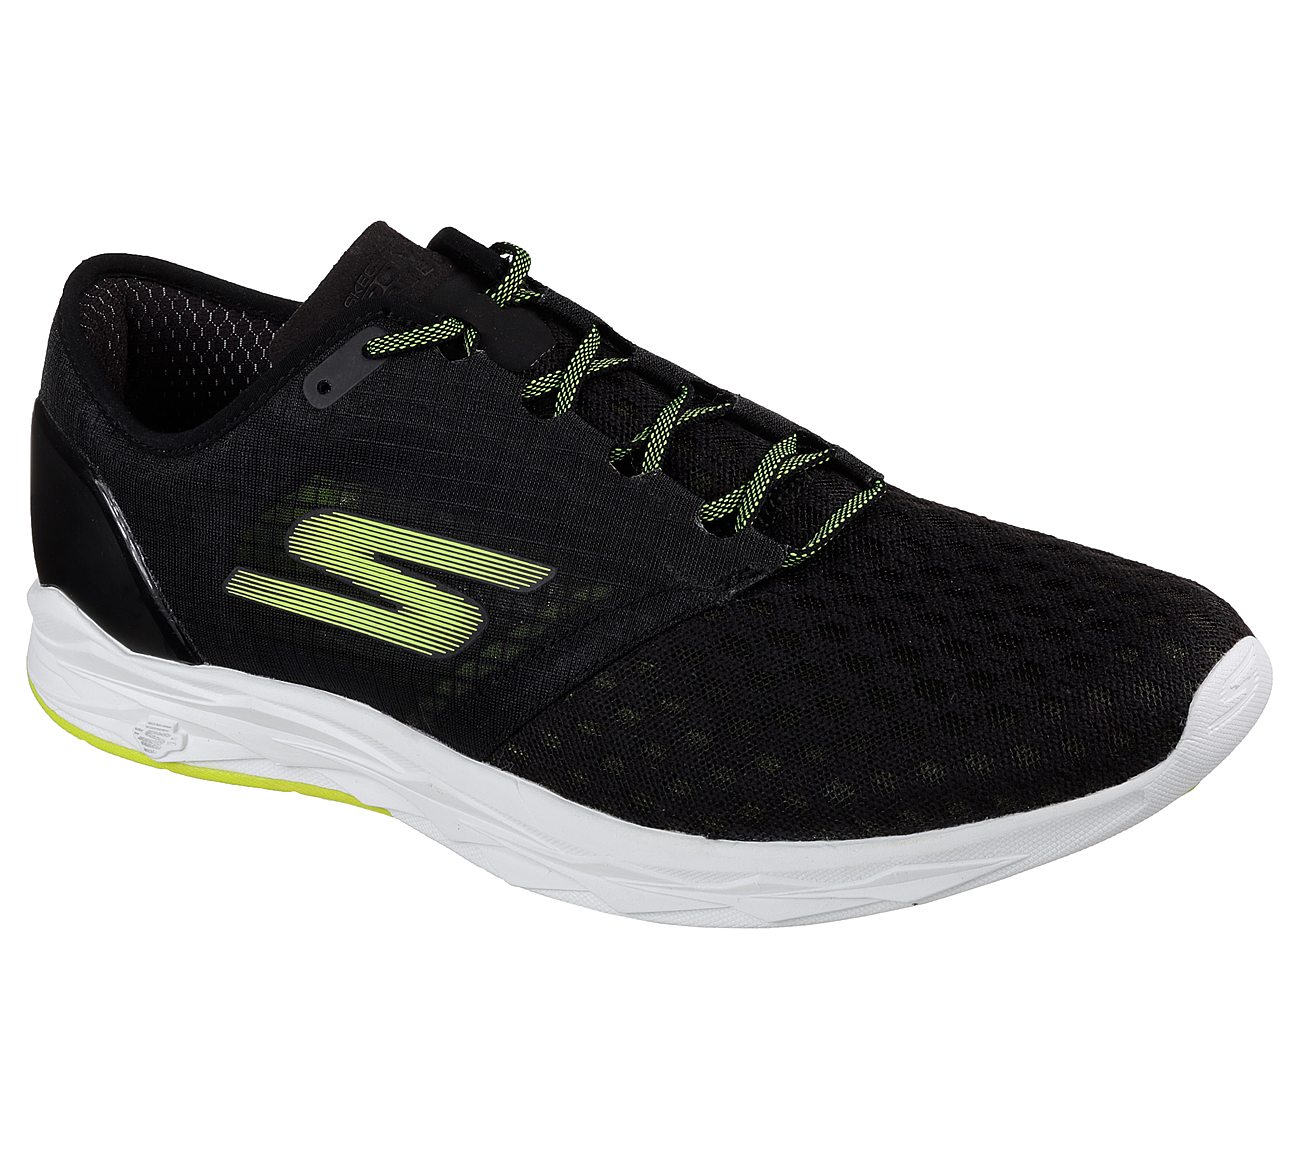 Meb Speed 5 Skechers Performance Shoes